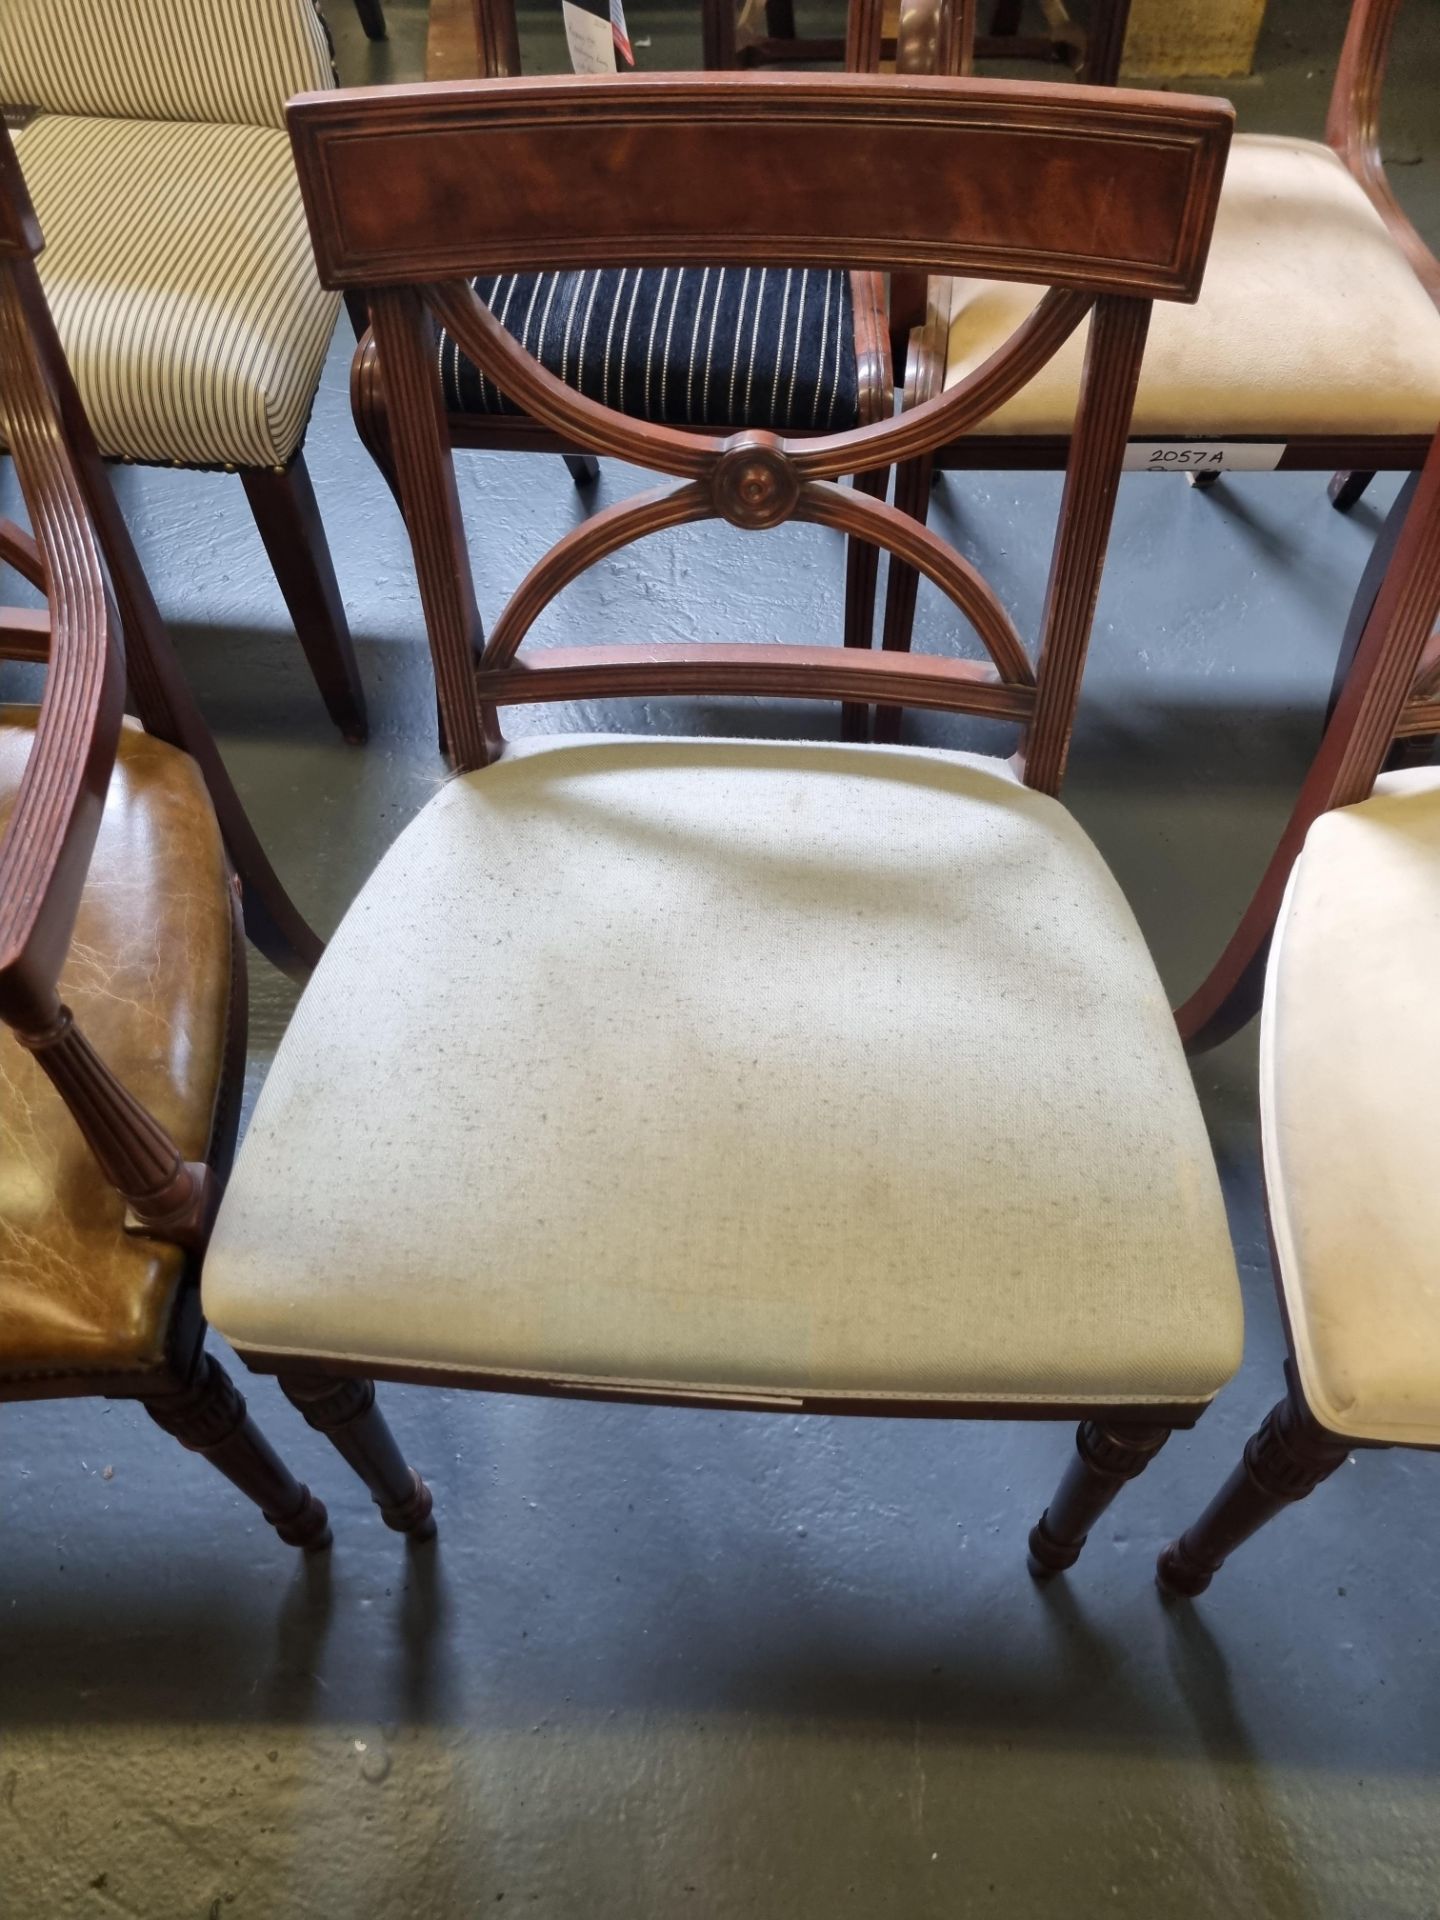 6 X Arthur Brett Sheraton-Style Mahogany Upholstered Dining Chairs Featuring A Well Figured Mahogany - Image 5 of 8